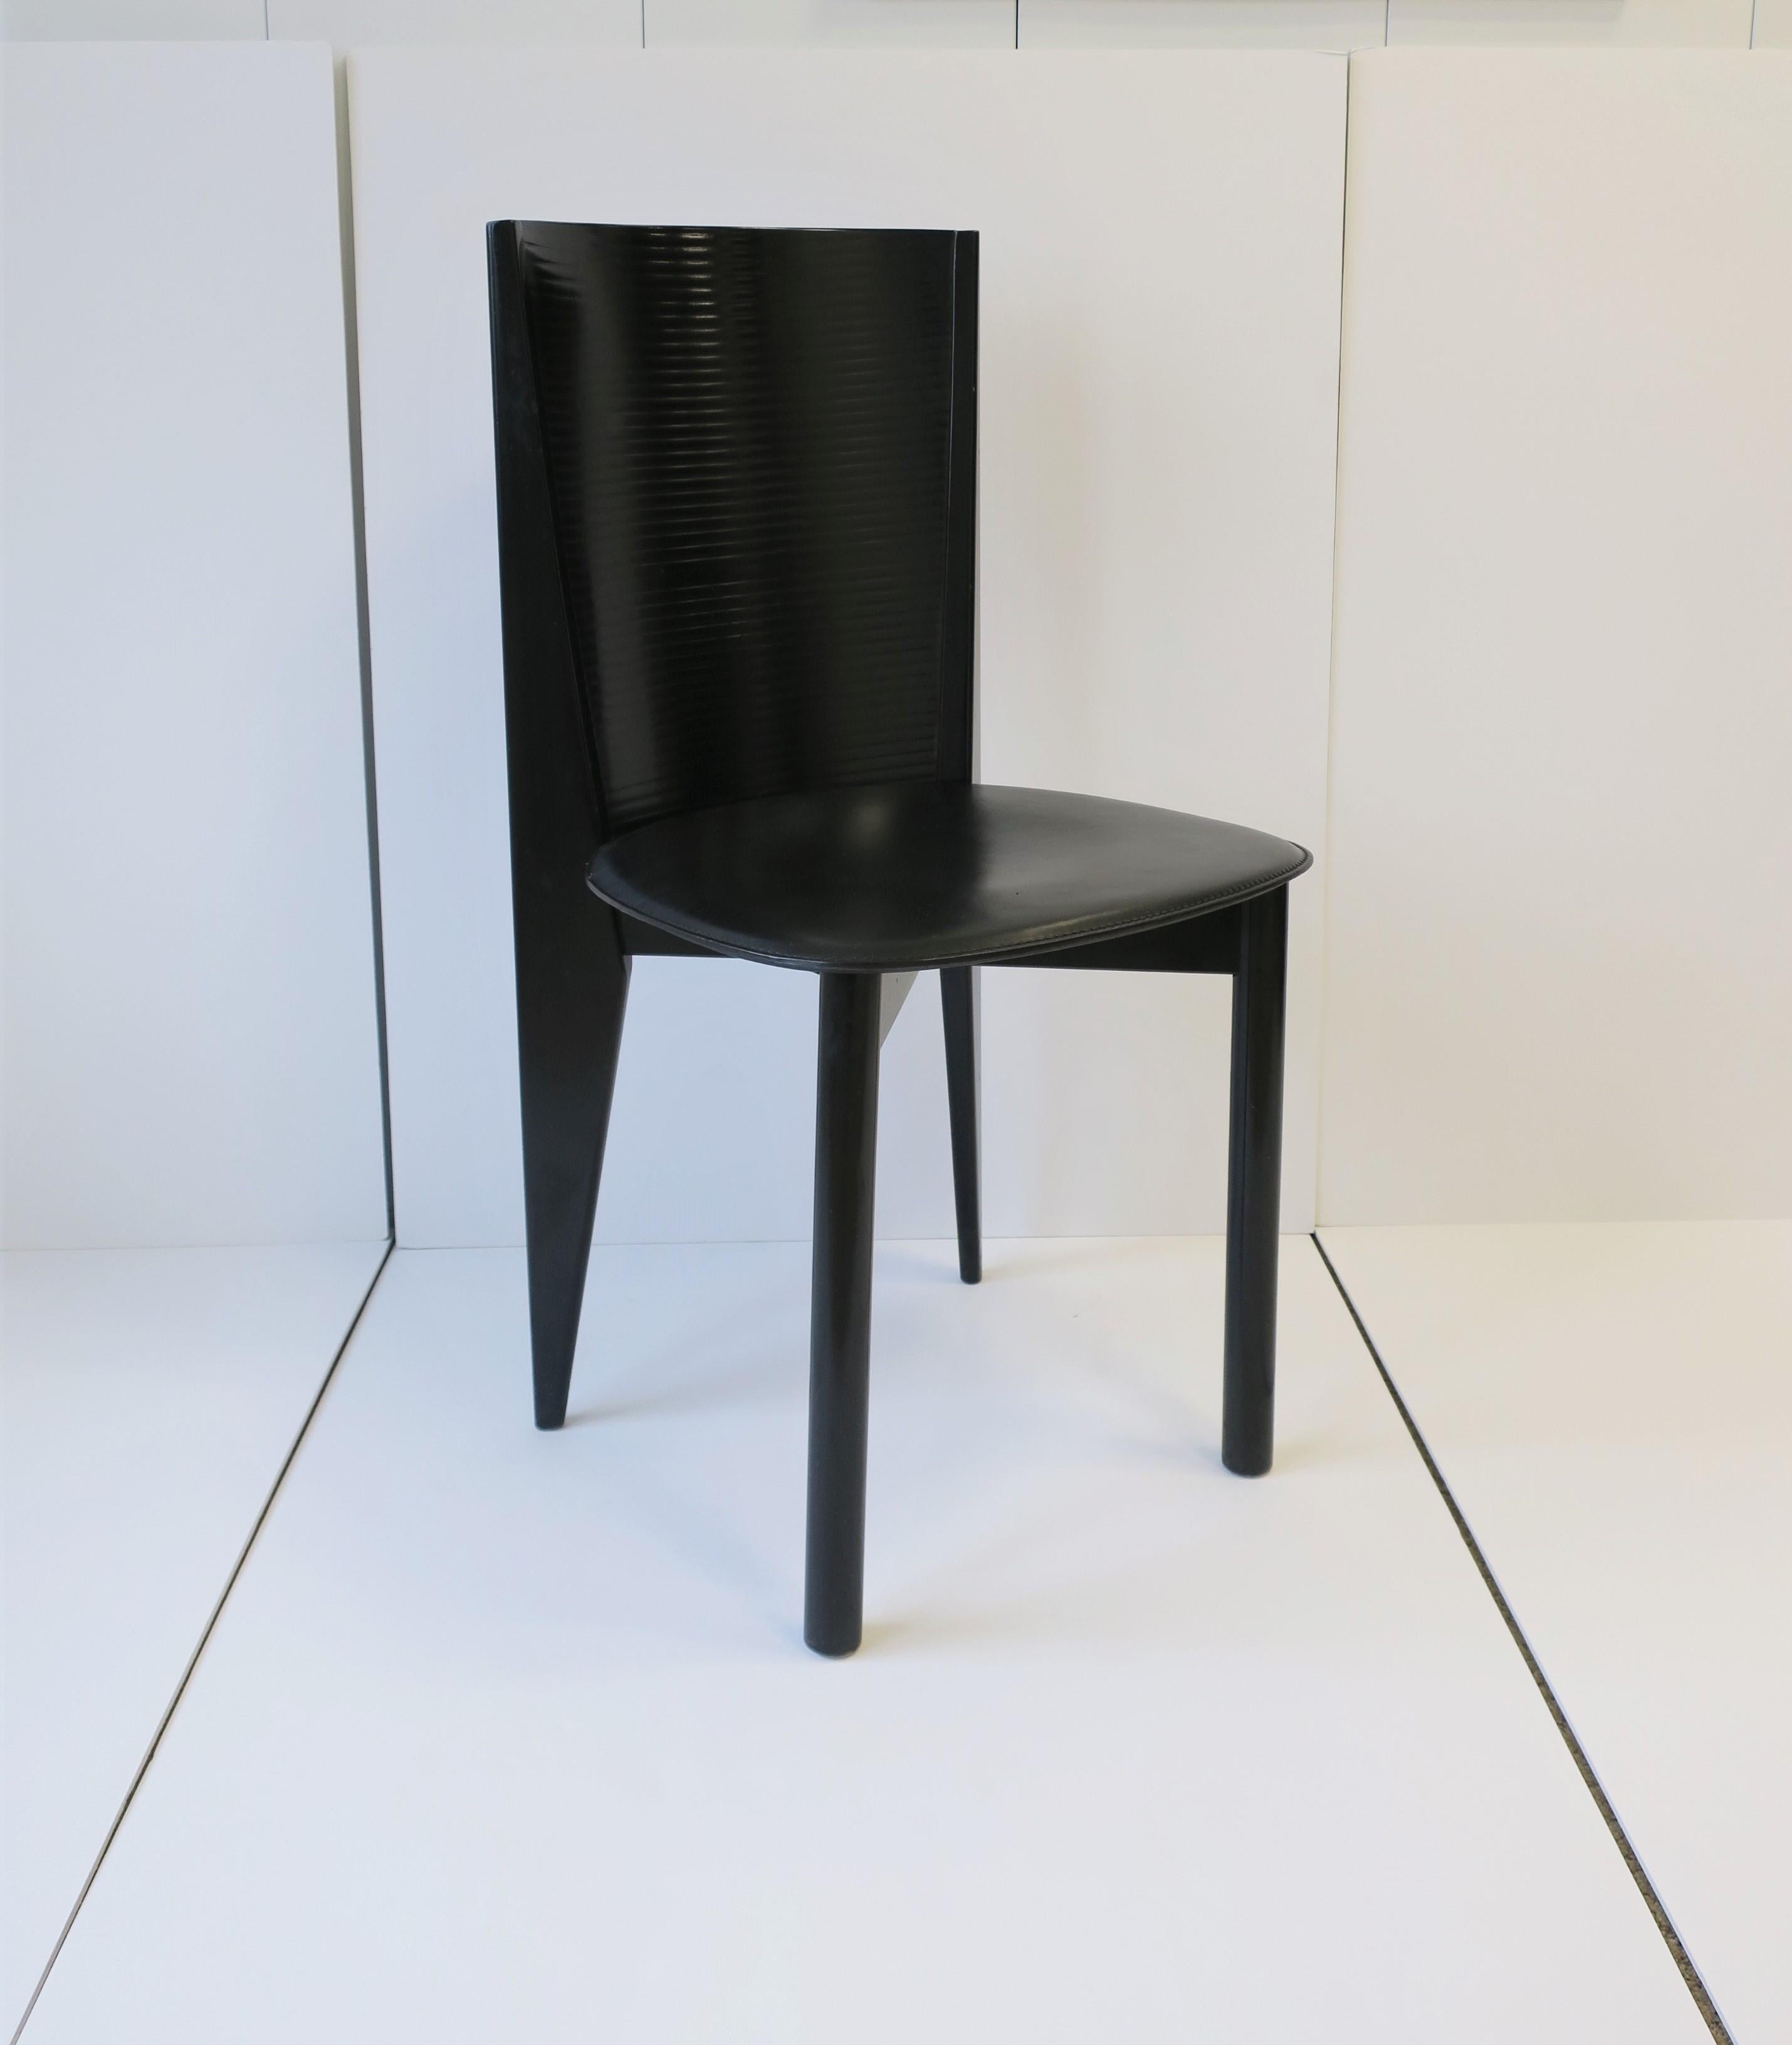 A very beautiful and chic Italian modern style or Postmodern period black lacquer wood and leather side or desk chair(s), circa late 20th century, late-1970s-1980s, Italy. Beautiful detailing in chair legs and back. With maker's mark on bottom: